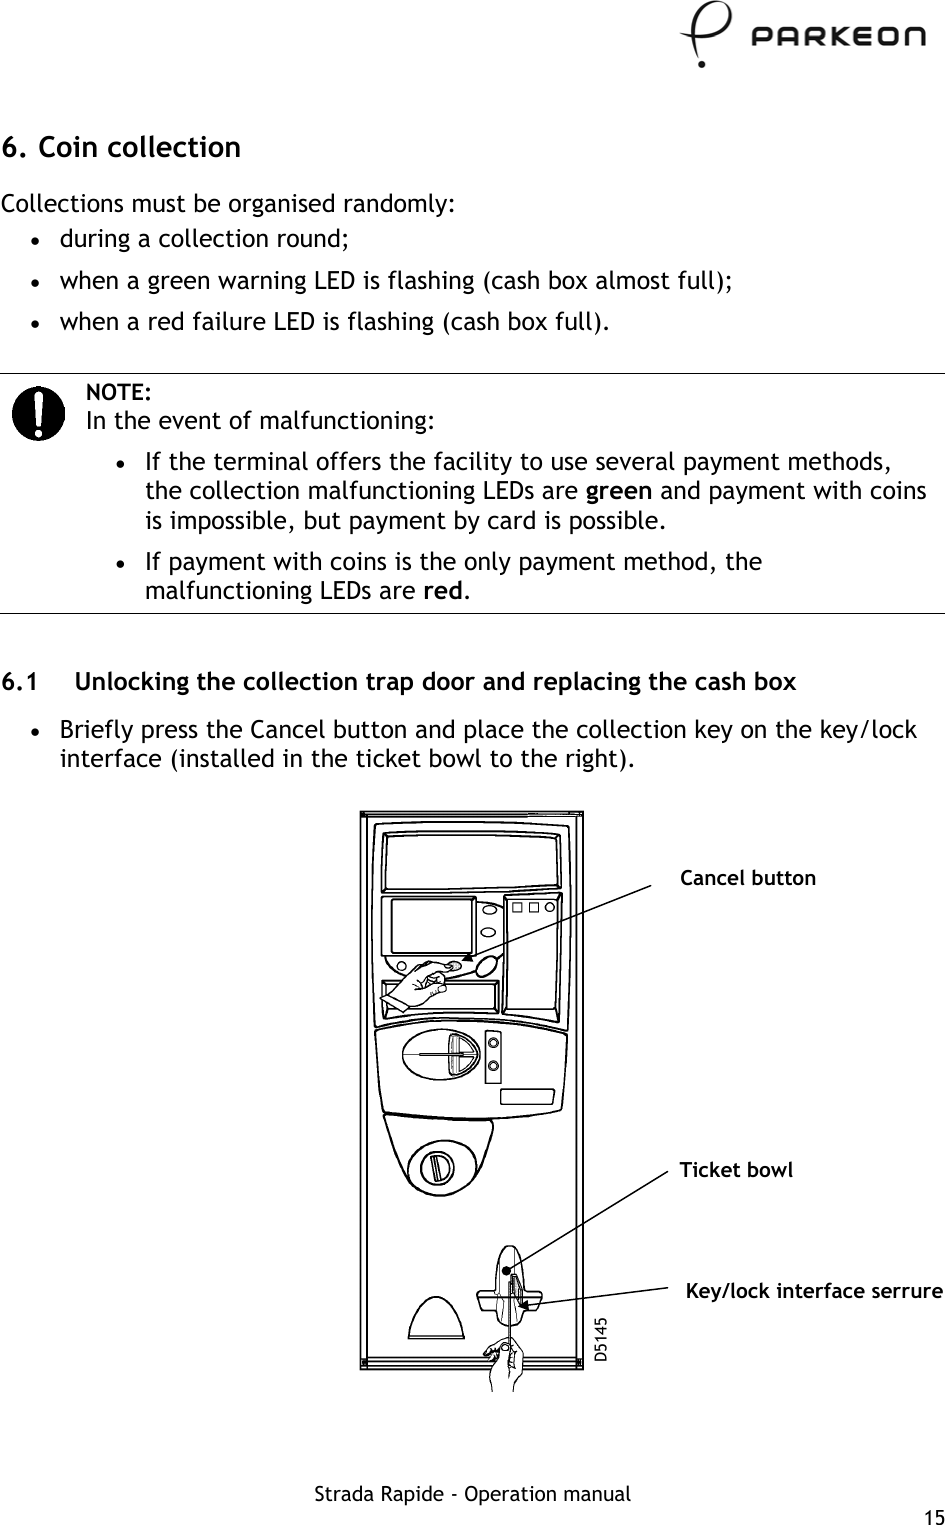     6. Coin collection Collections must be organised randomly: •  during a collection round; •  when a green warning LED is flashing (cash box almost full); •  when a red failure LED is flashing (cash box full).   NOTE: In the event of malfunctioning: •  If the terminal offers the facility to use several payment methods, the collection malfunctioning LEDs are green and payment with coins is impossible, but payment by card is possible. •  If payment with coins is the only payment method, the malfunctioning LEDs are red.  6.1  Unlocking the collection trap door and replacing the cash box •  Briefly press the Cancel button and place the collection key on the key/lock interface (installed in the ticket bowl to the right).   Cancel button Ticket bowl Key/lock interface serrure D5145 Strada Rapide - Operation manual  15 